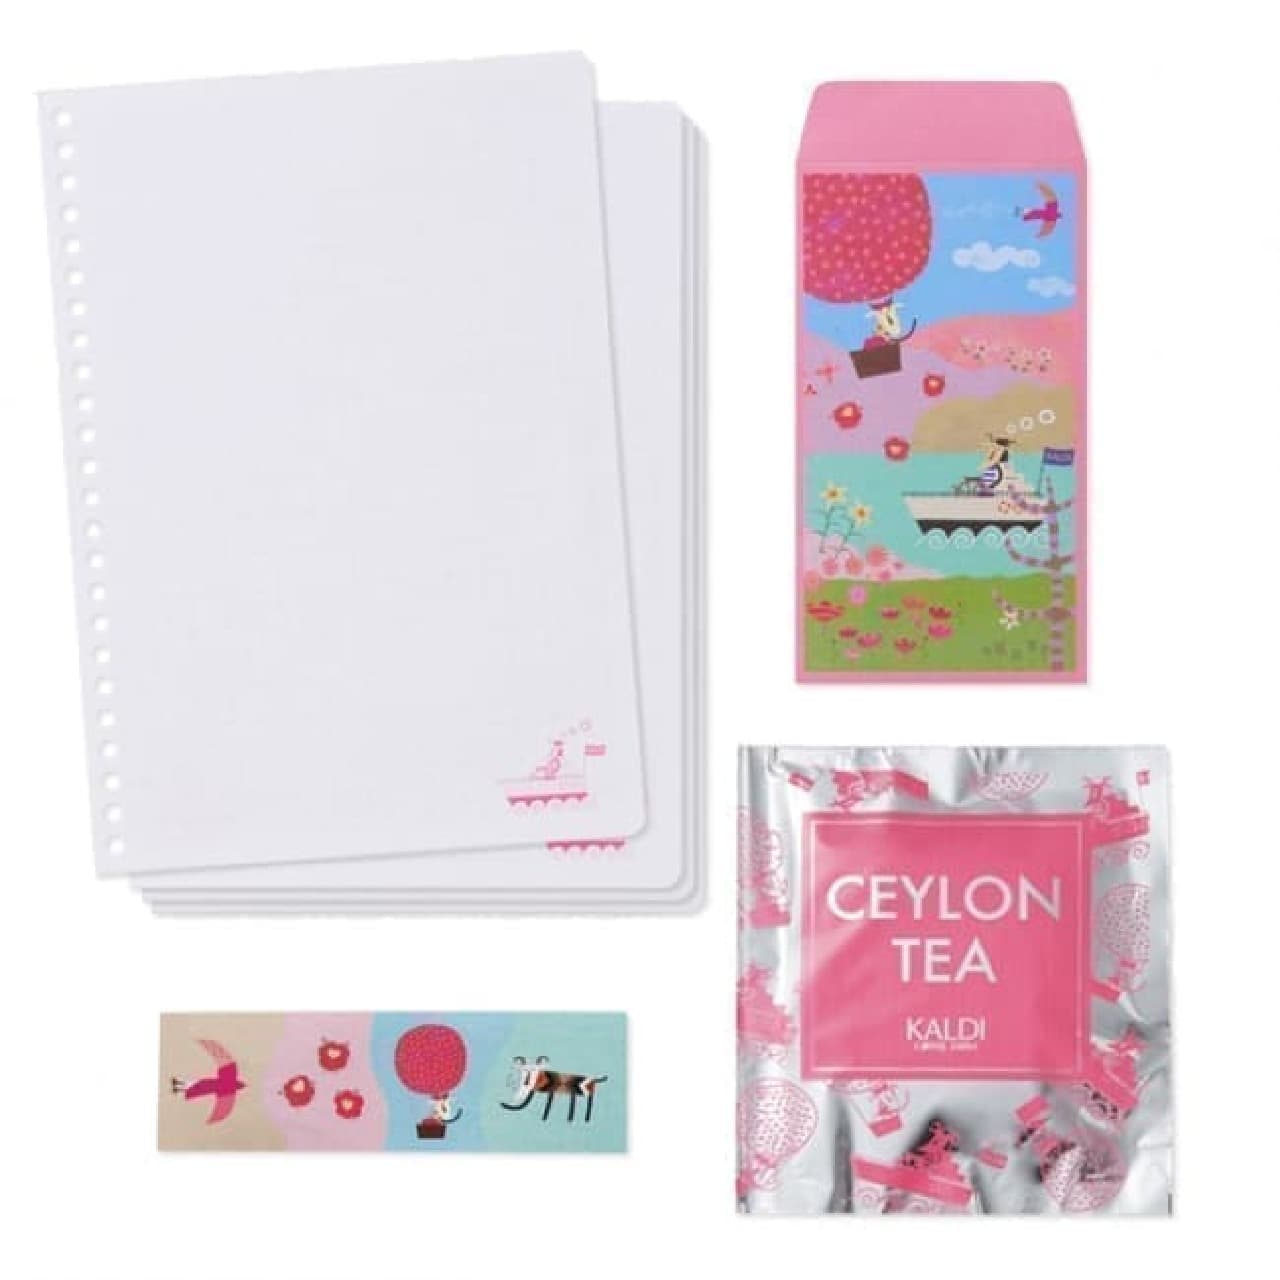 KALDI "Stationery Set" Appears--A luxurious 10-piece set of stationery and tea bags